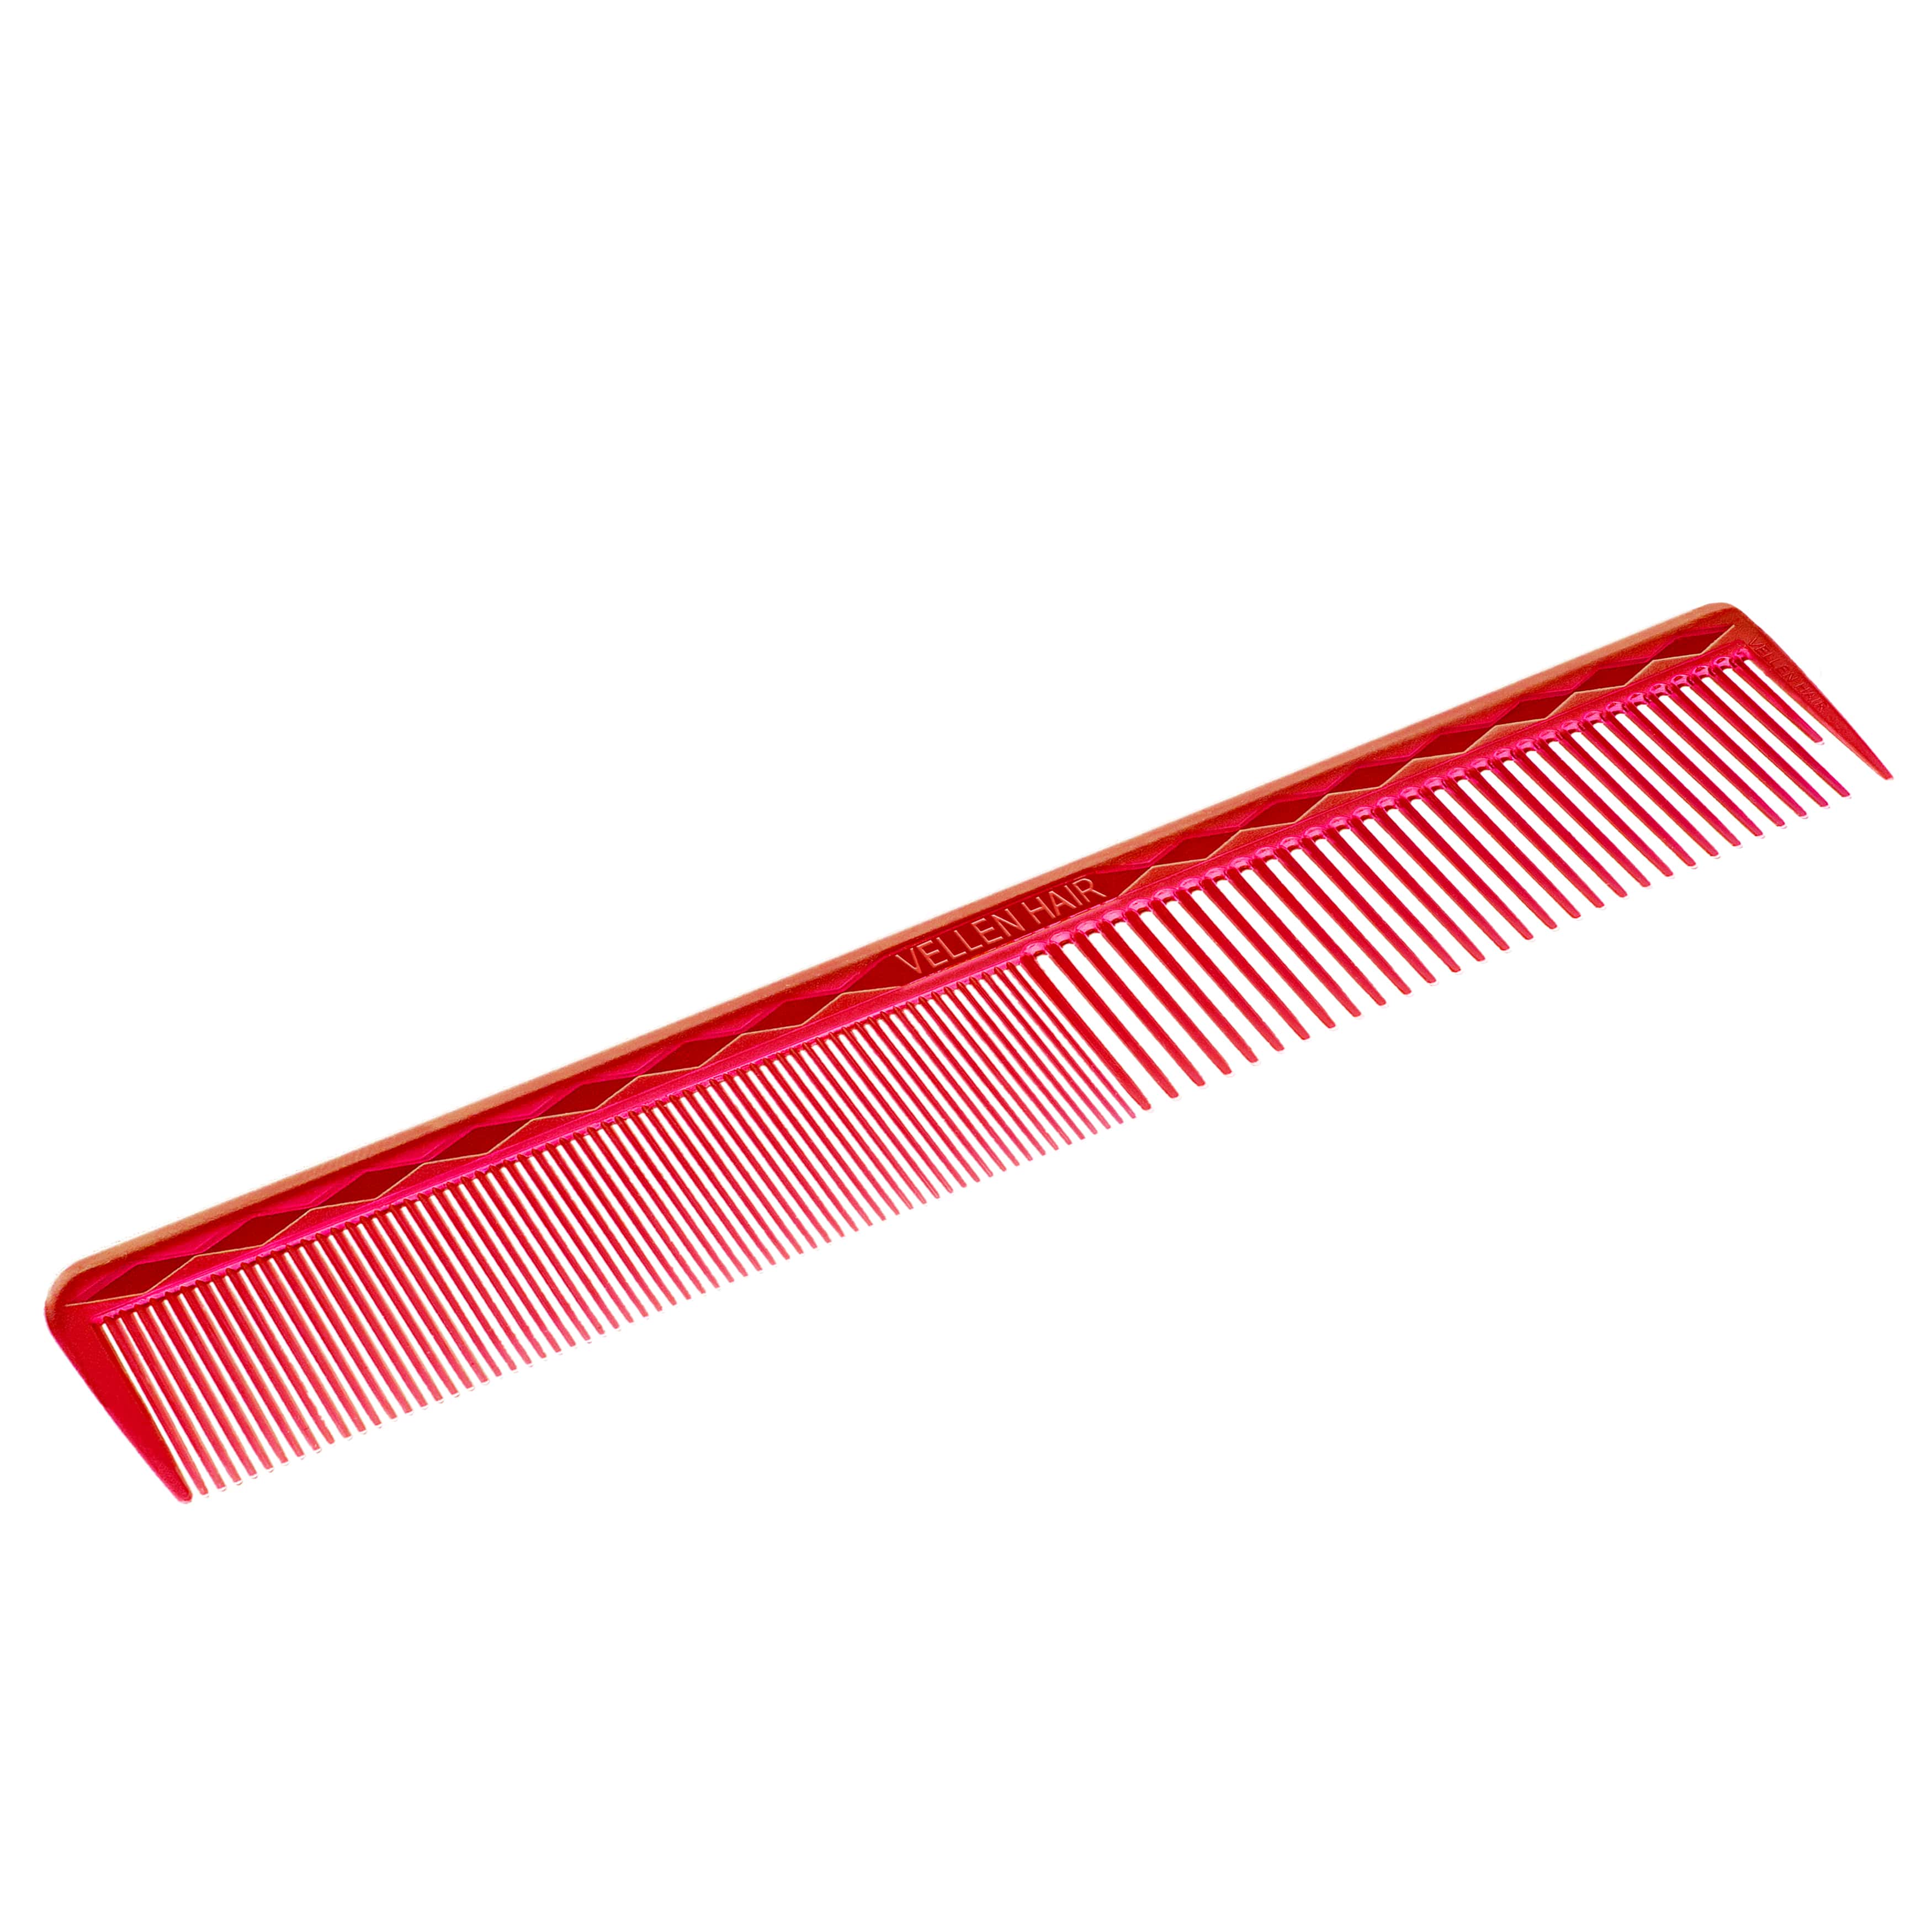 Vellen Hair® Ultimate Cutting Comb - VH202 - 17.8 cm / 7 inch - red transparent